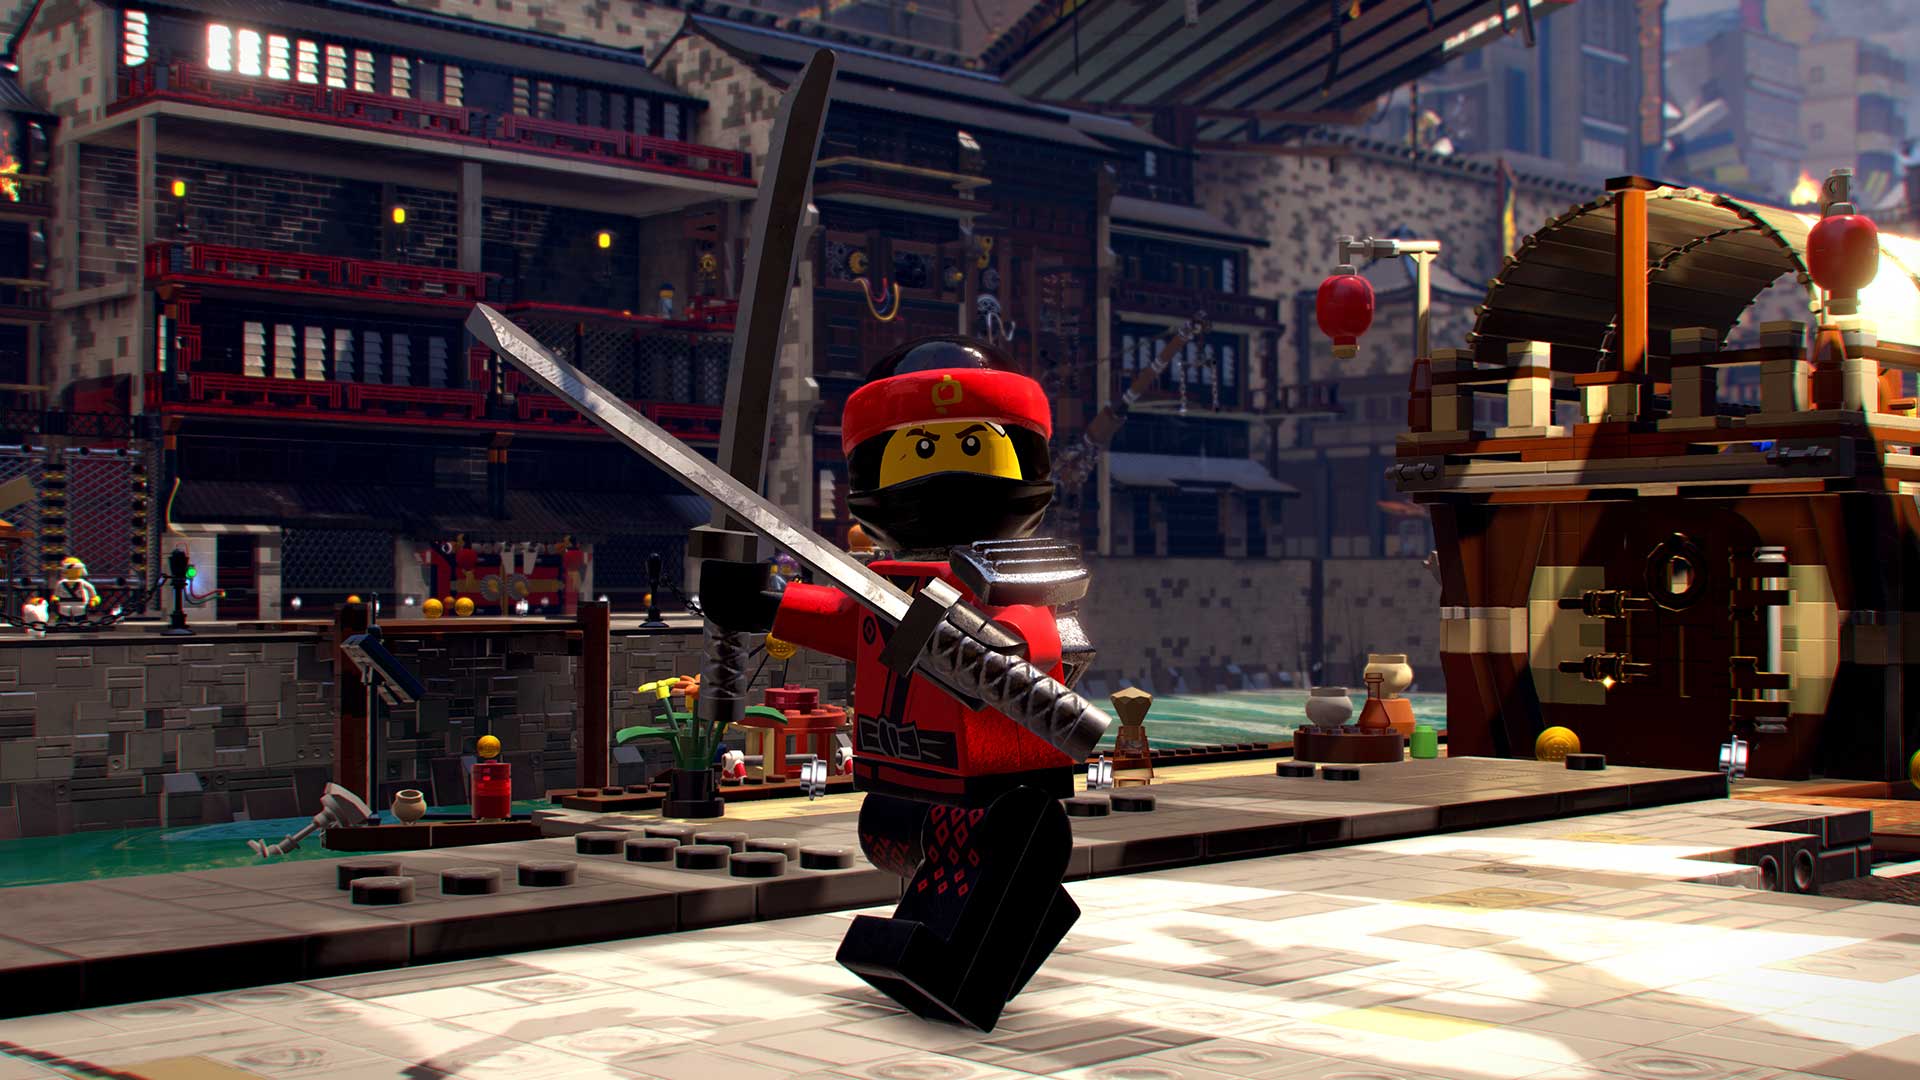 REVIEW : LEGO NINJAGO Movie Video Game (PS4/ PS4 Pro)